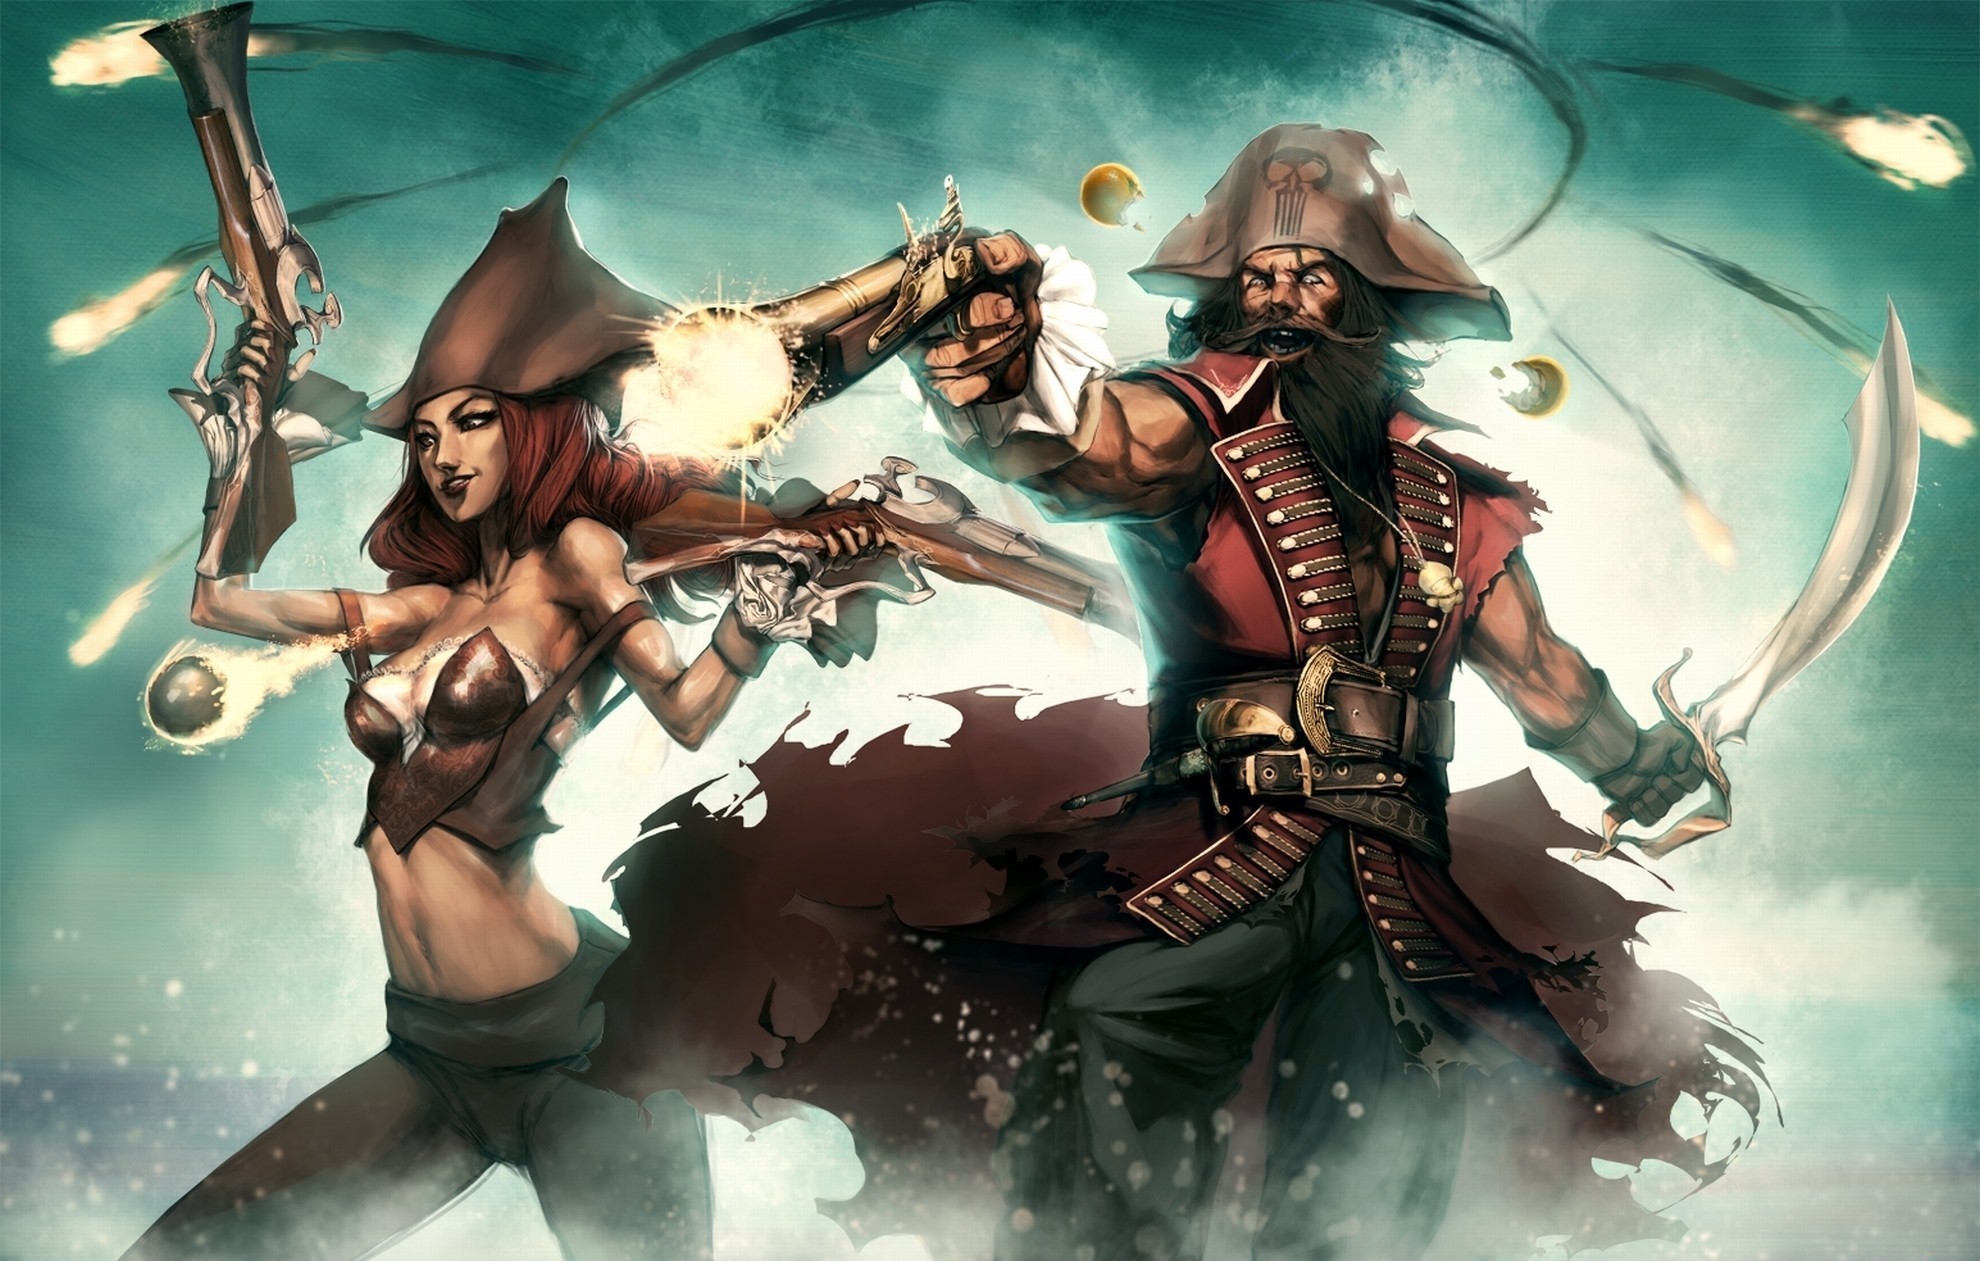 General 1980x1261 fantasy art League of Legends pirates Miss Fortune (League of Legends) video games video game girls video game men video game art girls with guns hat women with hats redhead gun weapon fantasy men fantasy girl dual wield Gangplank (League of Legends) boobs belly